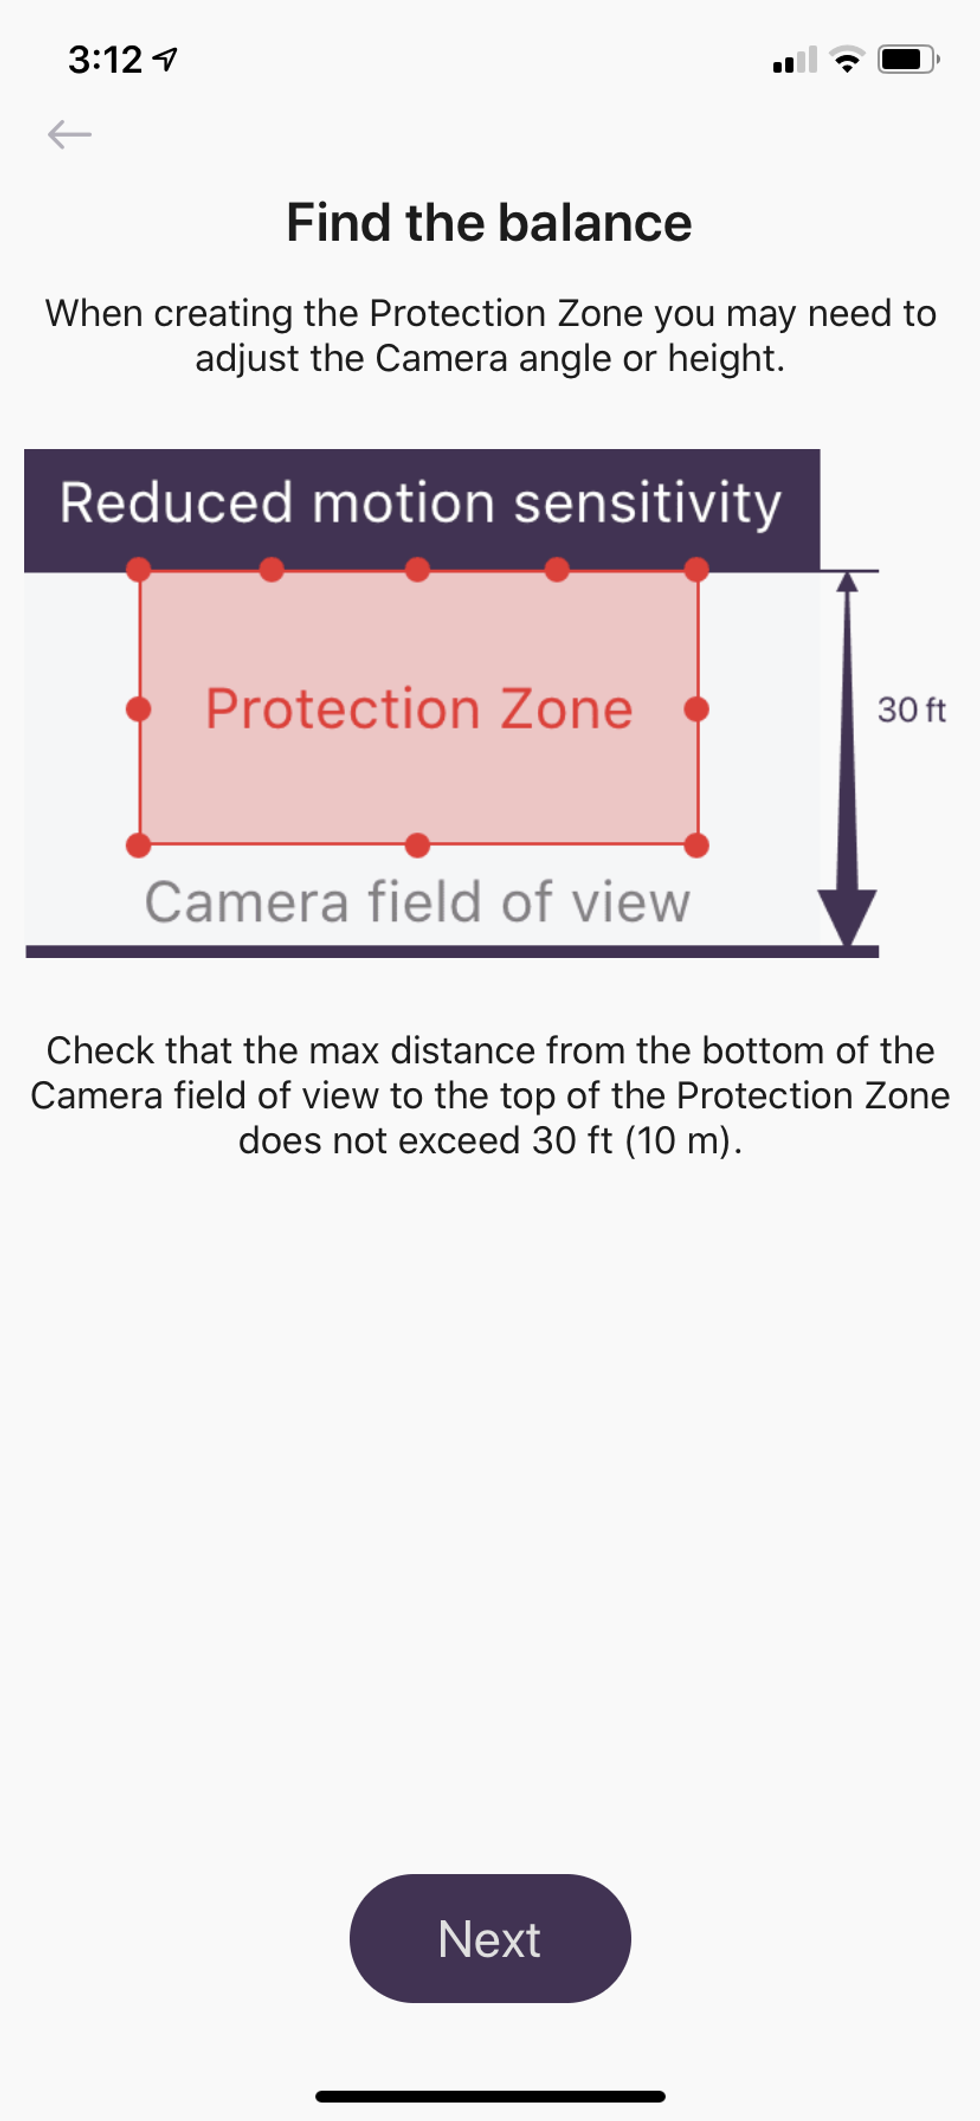 Deep Sentinel provides advice in the app on how to setup protection zones.